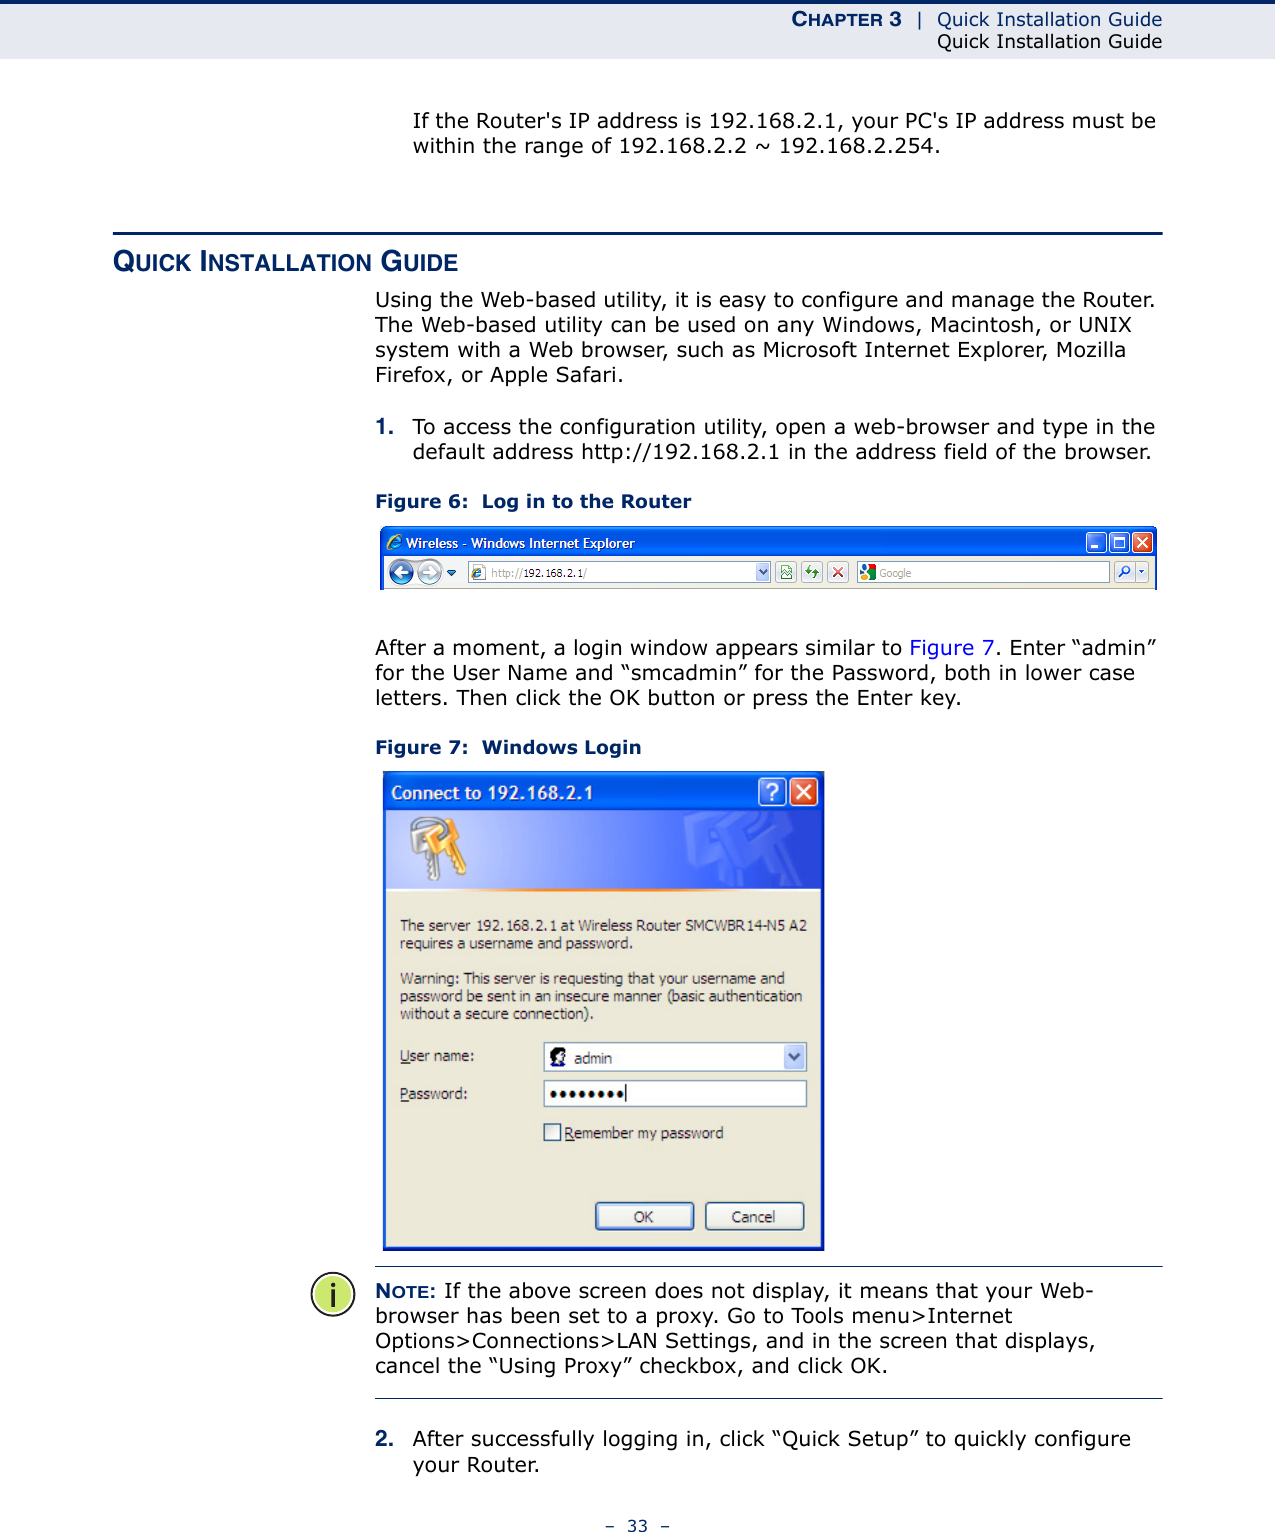 CHAPTER 3  |  Quick Installation GuideQuick Installation Guide–  33  –If the Router&apos;s IP address is 192.168.2.1, your PC&apos;s IP address must be within the range of 192.168.2.2 ~ 192.168.2.254.QUICK INSTALLATION GUIDEUsing the Web-based utility, it is easy to configure and manage the Router. The Web-based utility can be used on any Windows, Macintosh, or UNIX system with a Web browser, such as Microsoft Internet Explorer, Mozilla Firefox, or Apple Safari.1. To access the configuration utility, open a web-browser and type in the default address http://192.168.2.1 in the address field of the browser.Figure 6:  Log in to the RouterAfter a moment, a login window appears similar to Figure 7. Enter “admin” for the User Name and “smcadmin” for the Password, both in lower case letters. Then click the OK button or press the Enter key.Figure 7:  Windows LoginNOTE: If the above screen does not display, it means that your Web-browser has been set to a proxy. Go to Tools menu&gt;Internet Options&gt;Connections&gt;LAN Settings, and in the screen that displays, cancel the “Using Proxy” checkbox, and click OK.2. After successfully logging in, click “Quick Setup” to quickly configure your Router.  